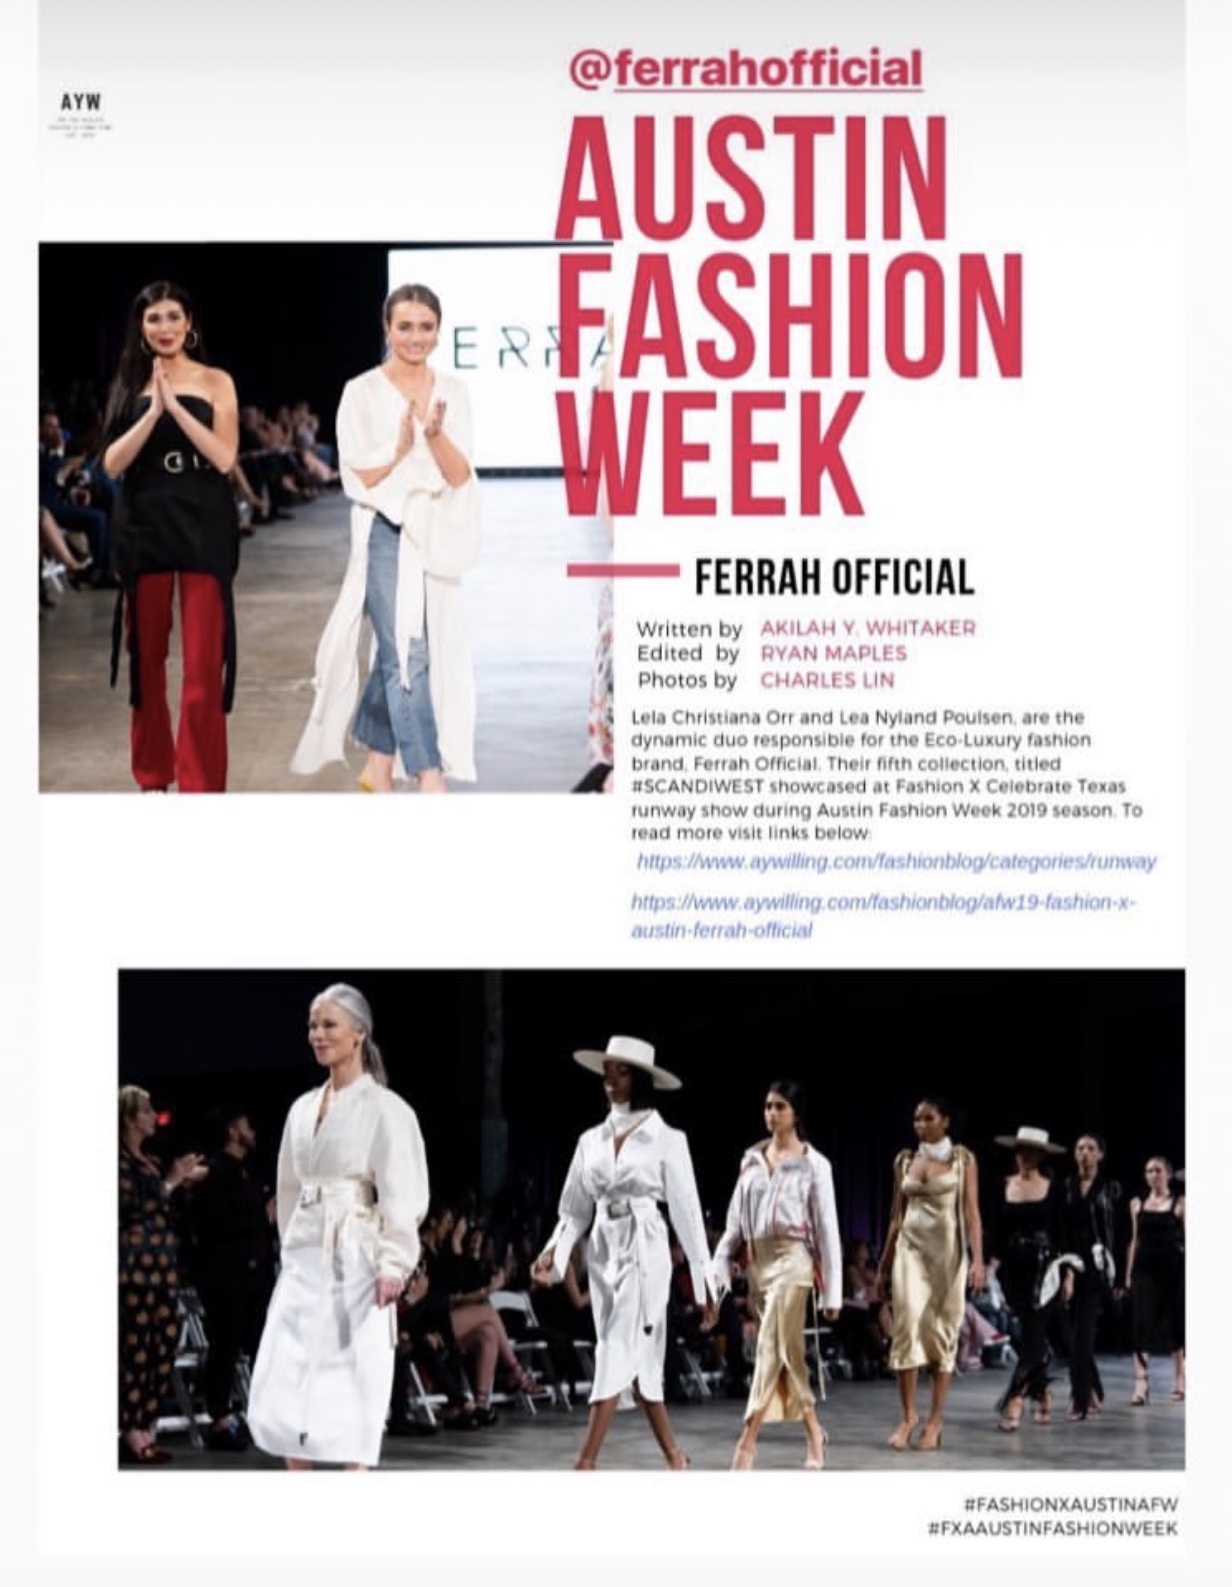 Recap on Austin Fashion Week, where collection V of Ferrah was showcased in February 2019.